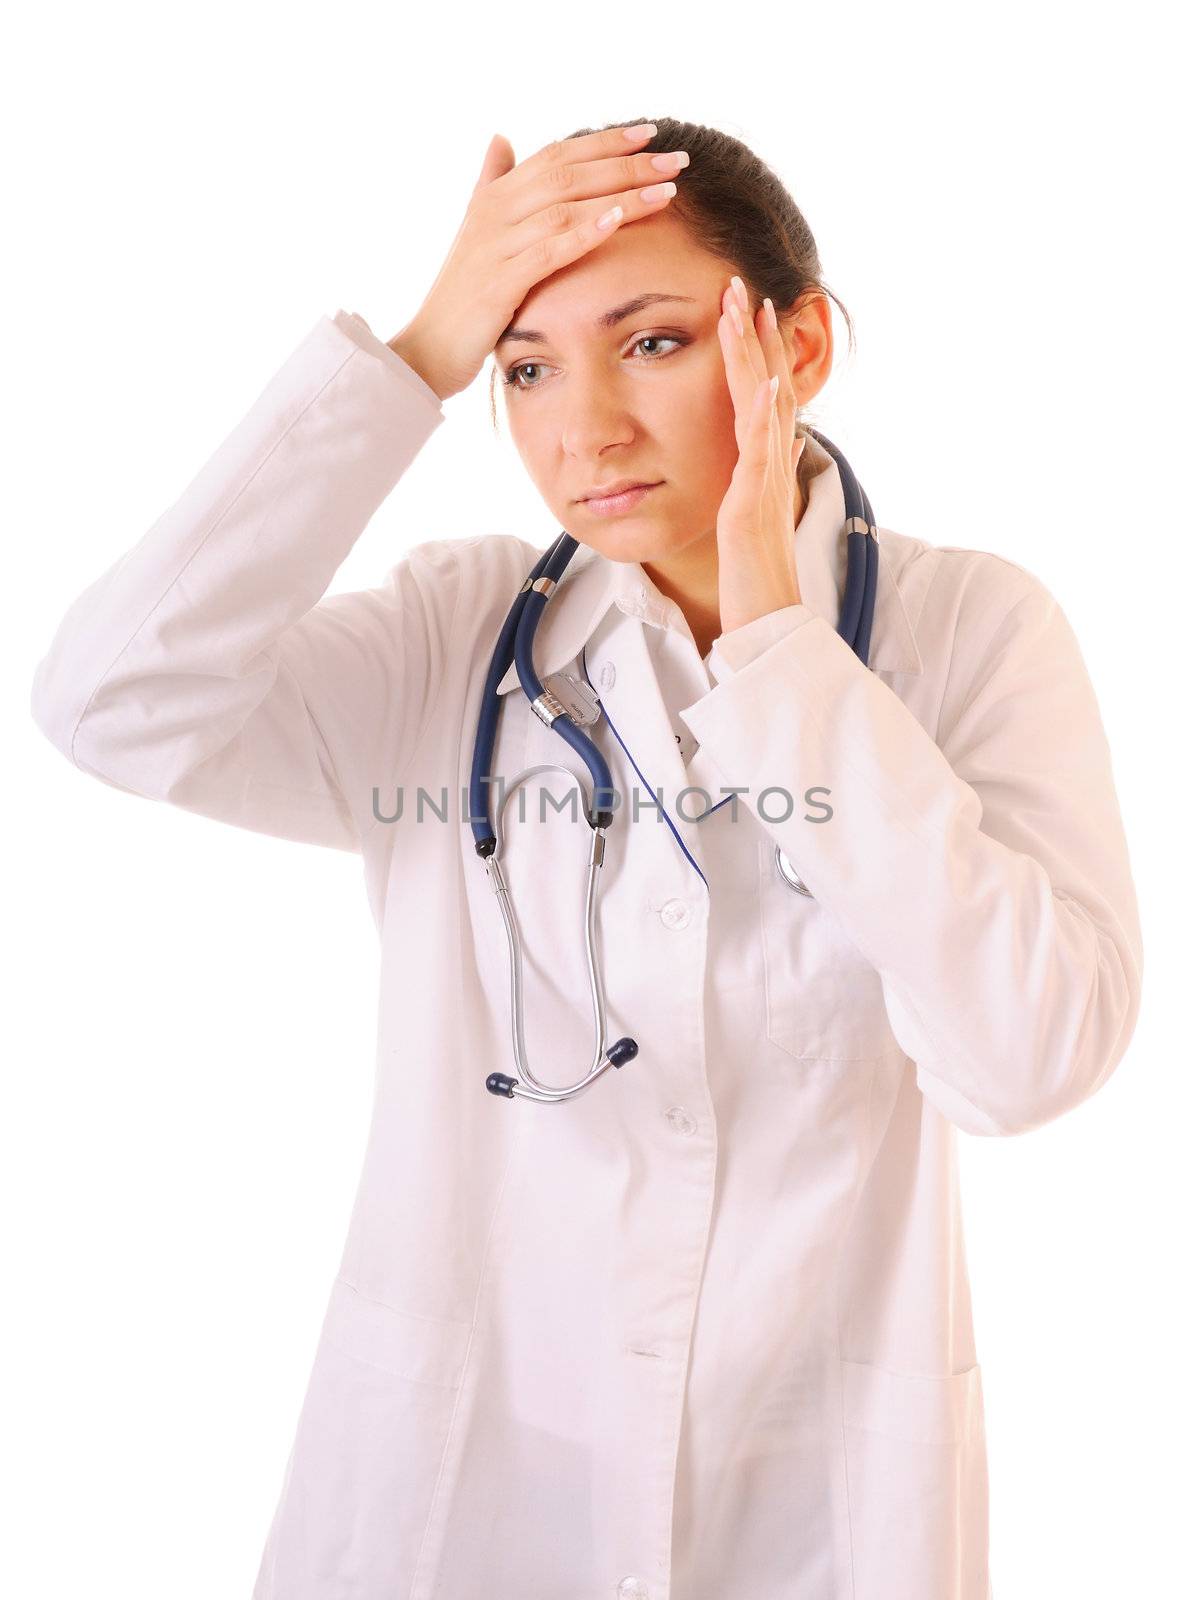 Doctor is suffering from headache. Isolated on white background.